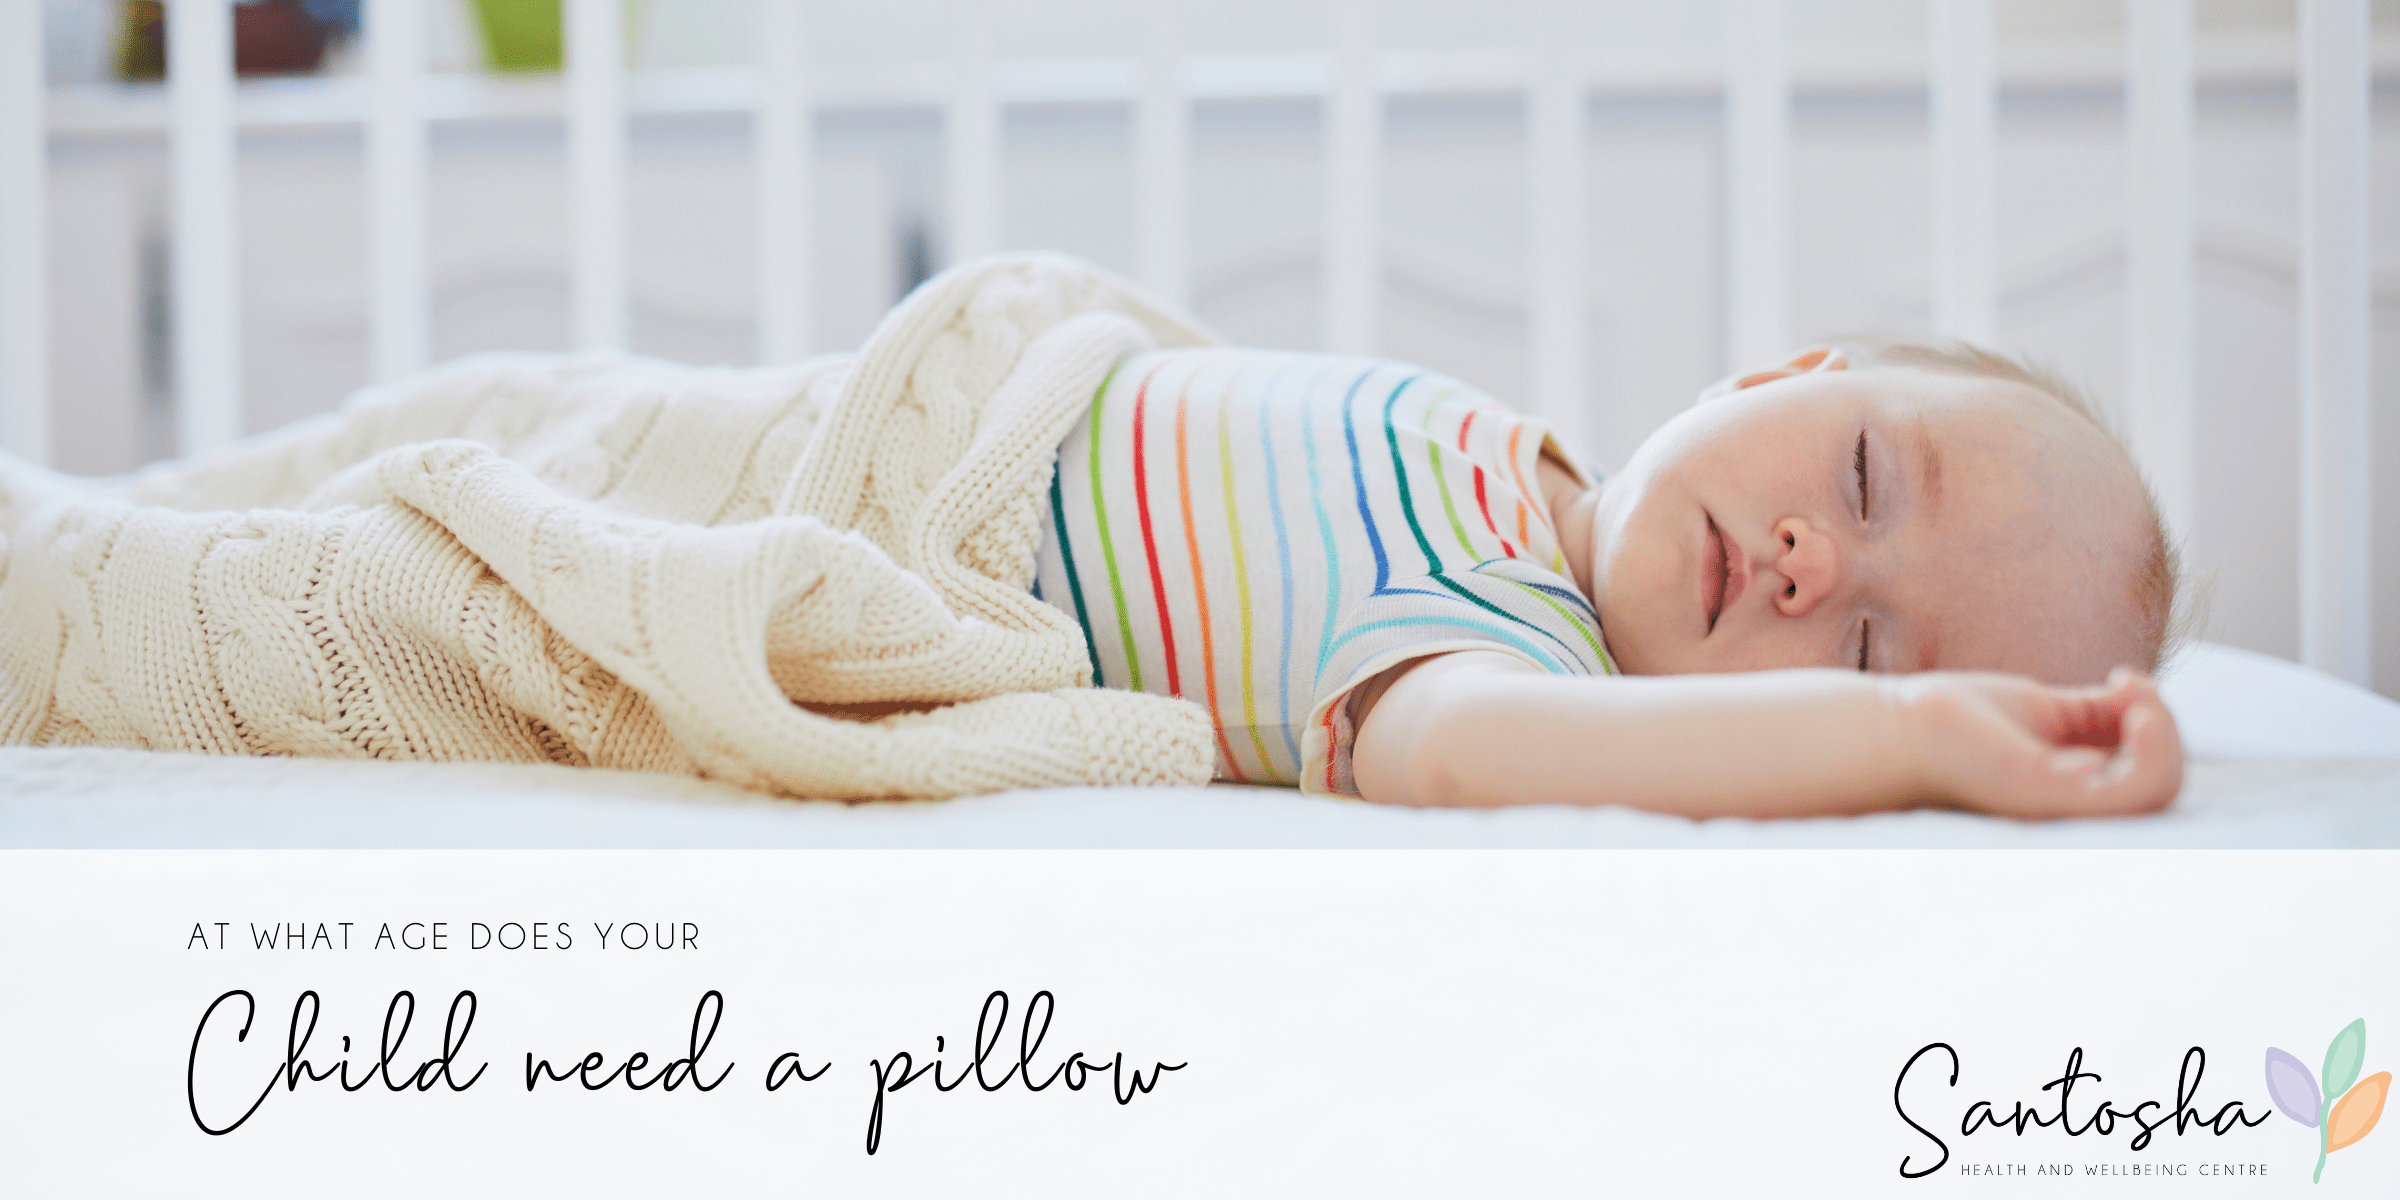 when does your child need a pillow